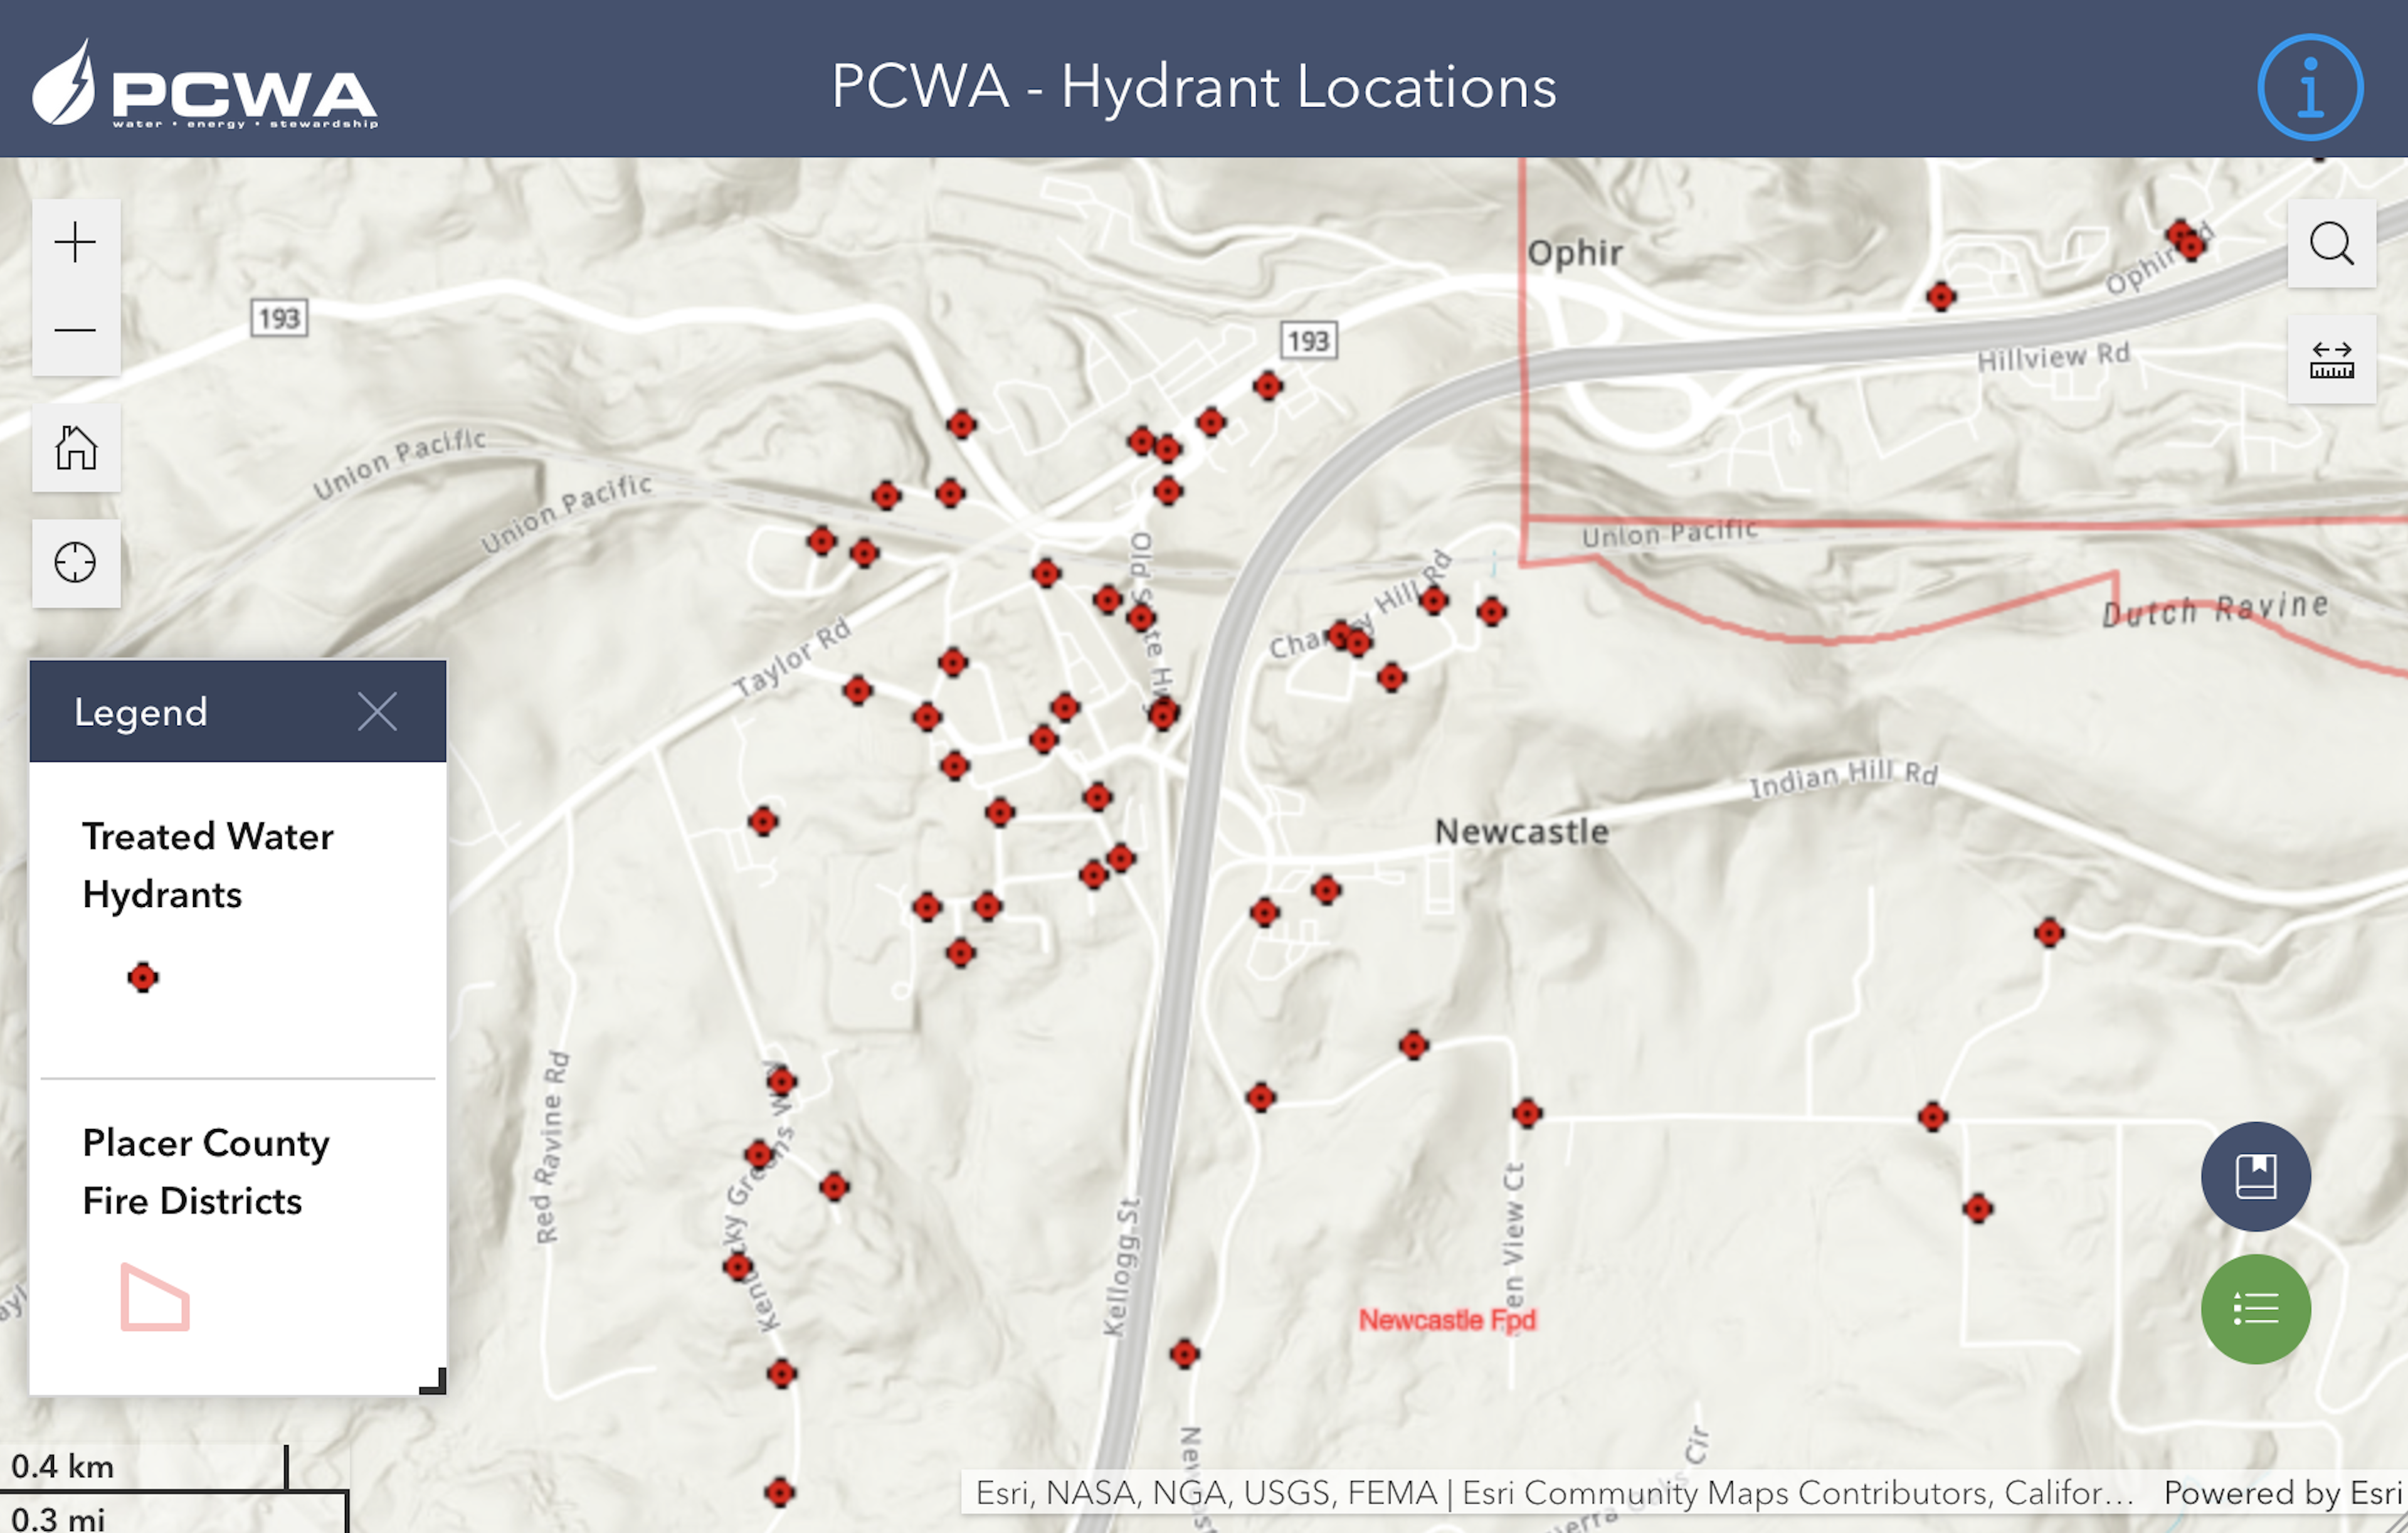 Thumbnail and link for PCWA Fire Hydrant Map